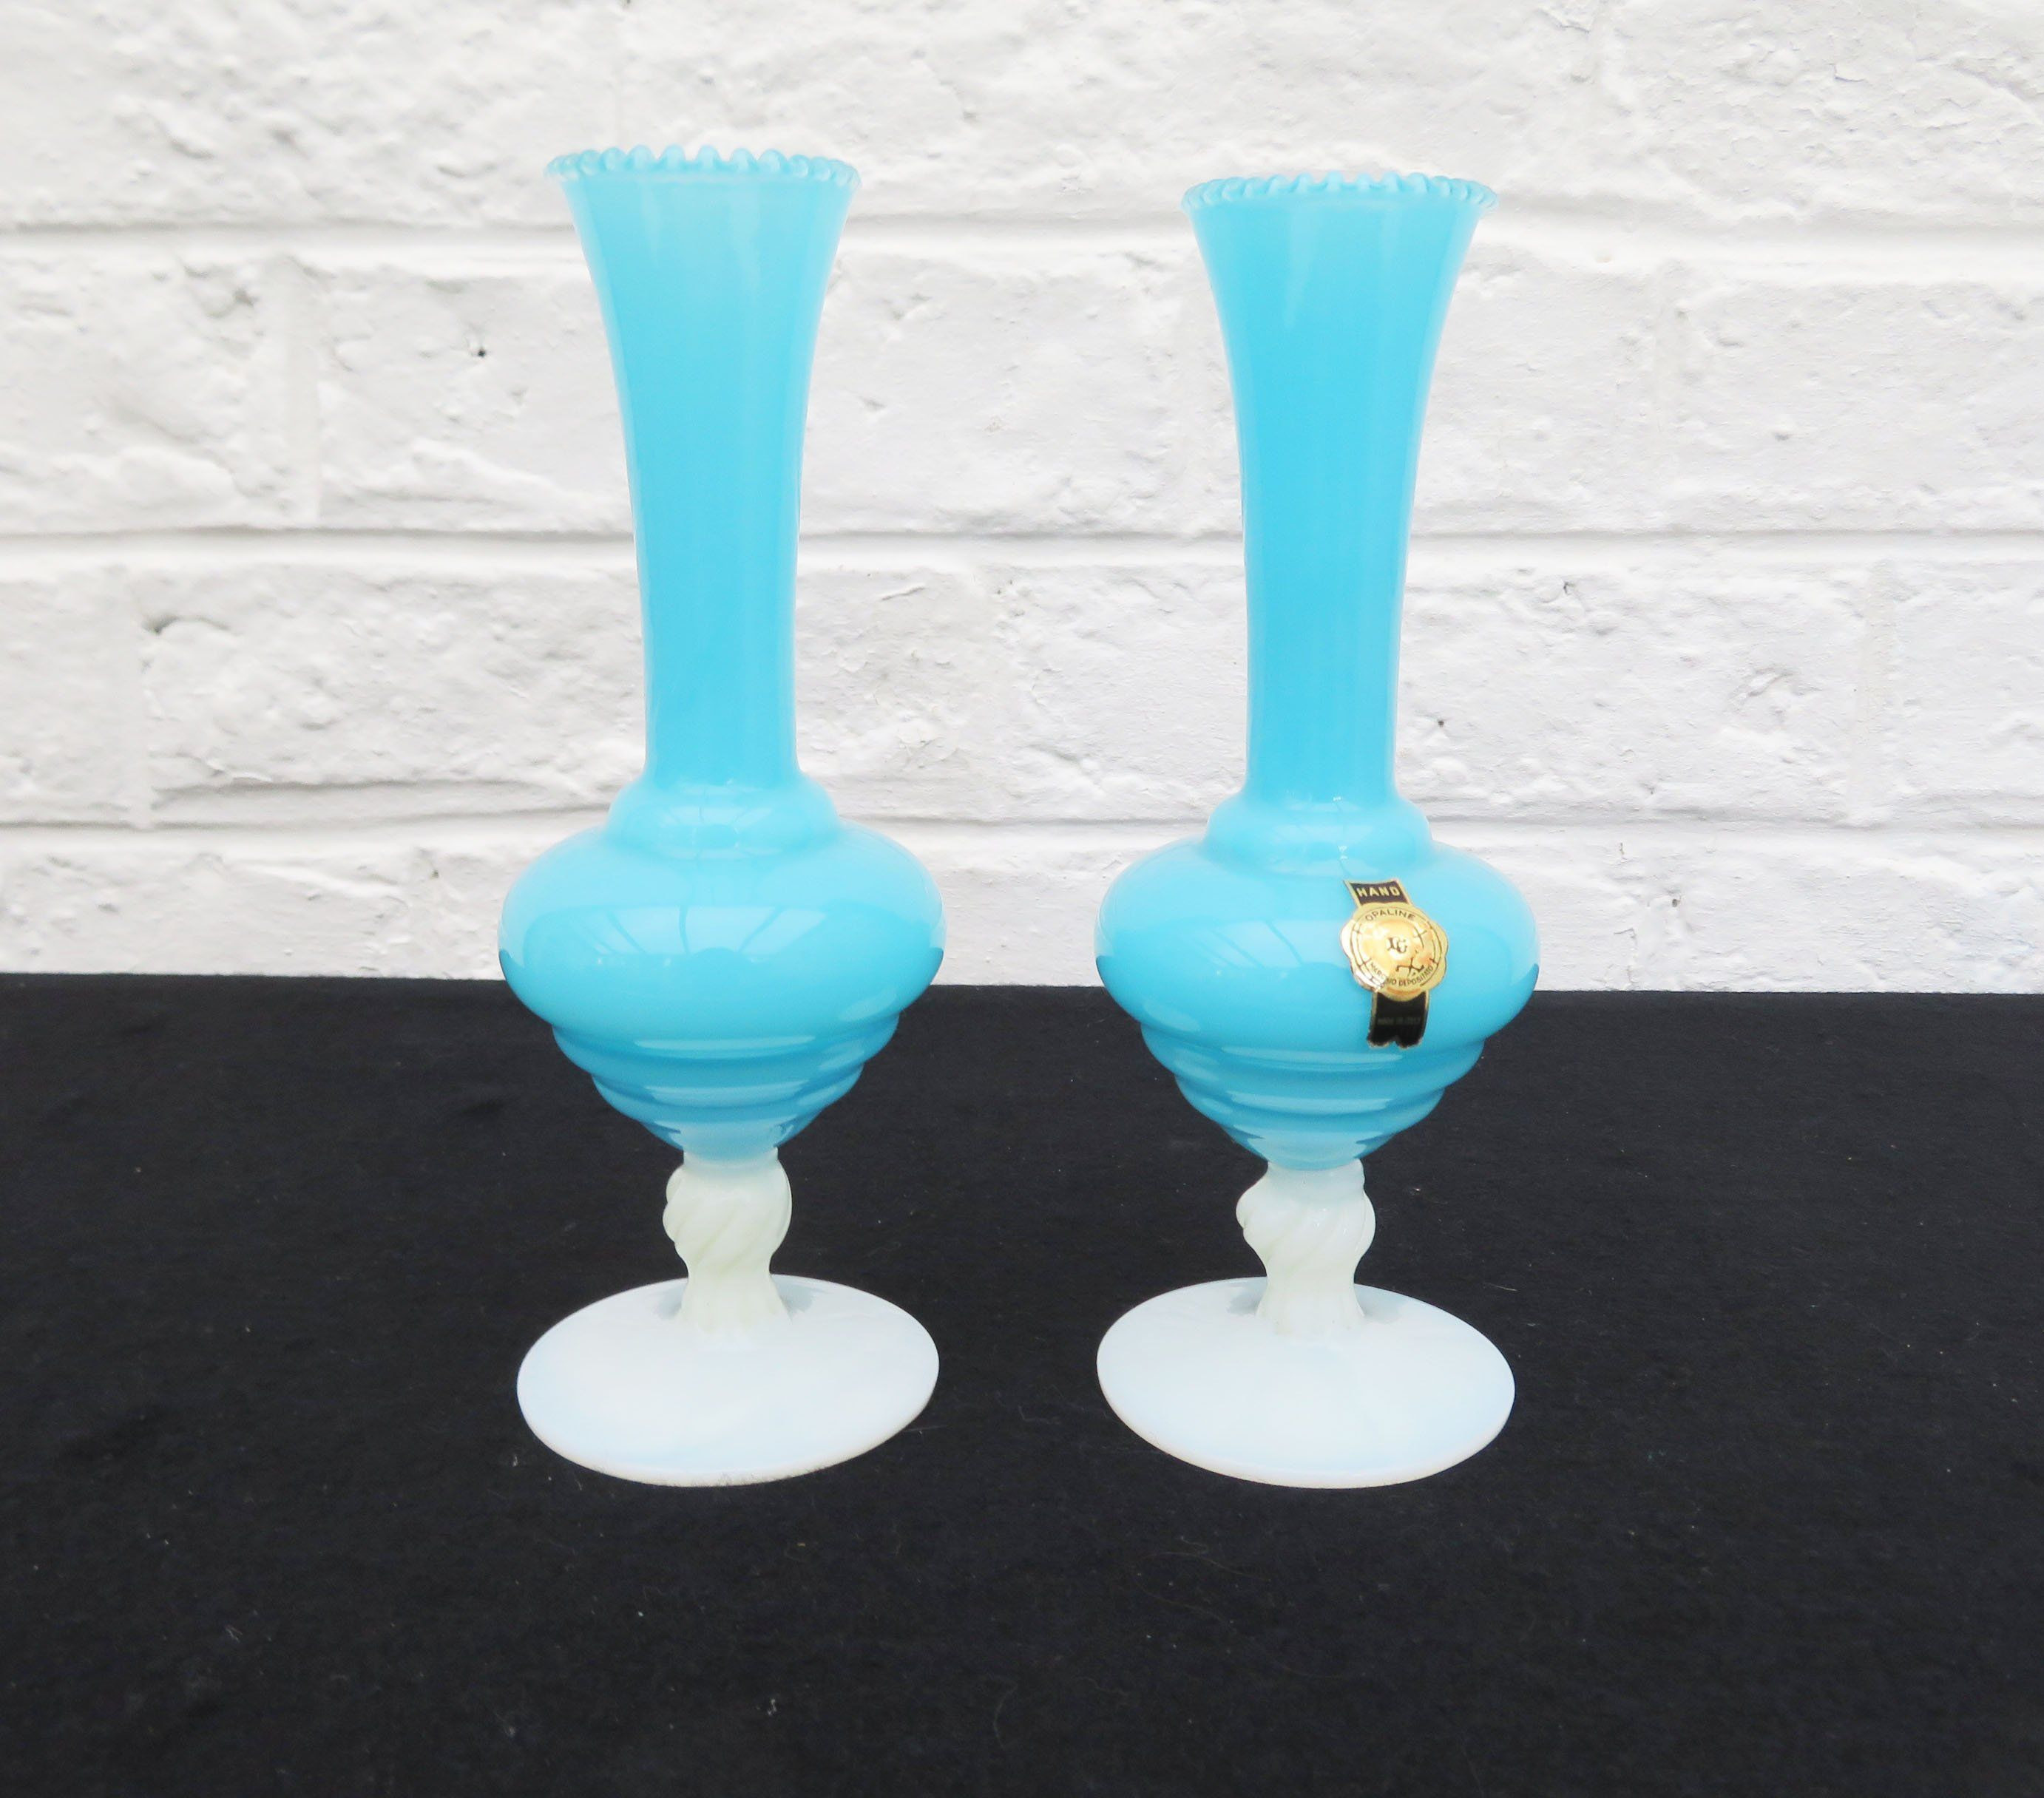 Vintage Tall Blue Glass Vase Of Two Vintage soft Blue Opaline Art Glass Vase White Opalescent Foot for Two Vintage soft Blue Opaline Art Glass Vase White Opalescent Foot Baby Blue Light Blue Opaline Bud Vase Handmade Italy Ruffle top by Ebyvintage On Etsy